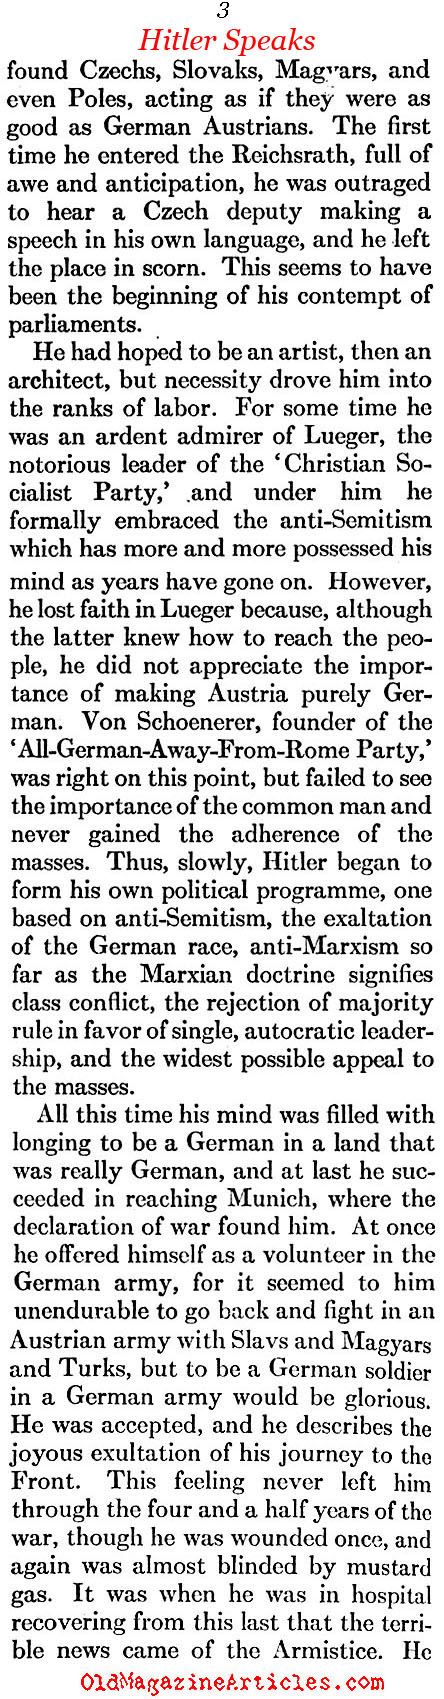 Hitler Gets a Bad Review (Atlantic Monthly, 1933)